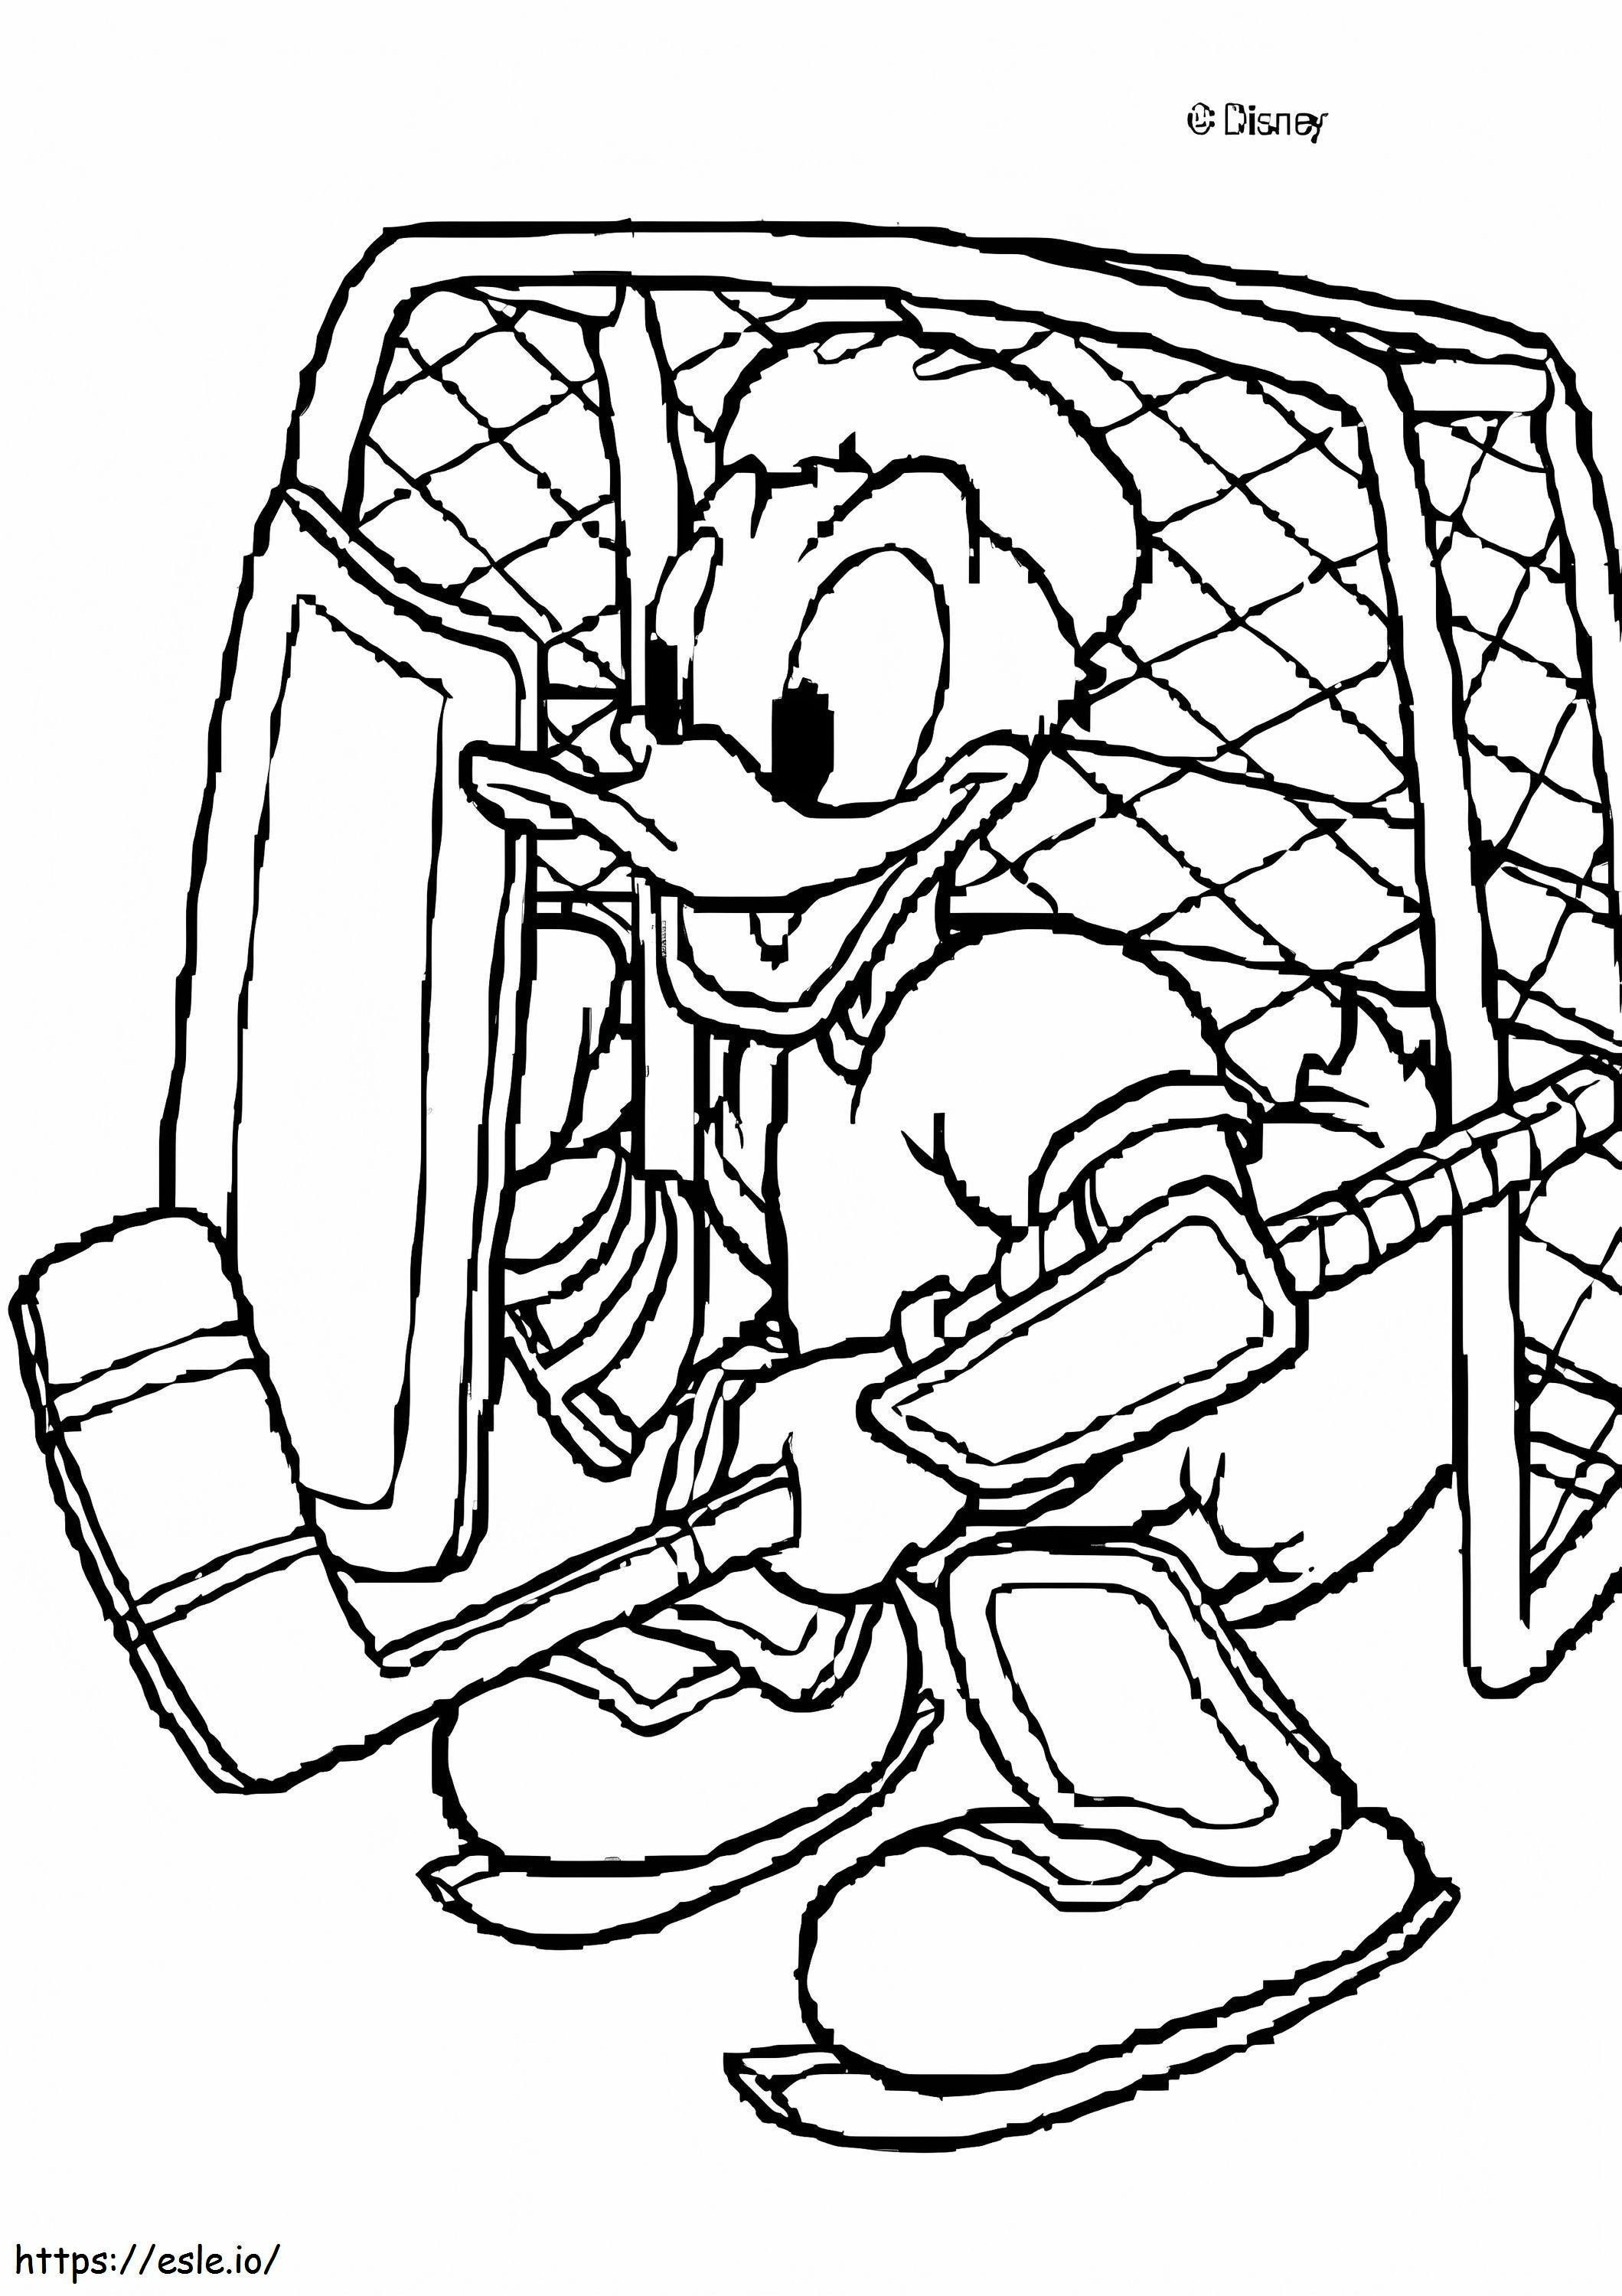 Donal Pato Playing Hockey coloring page